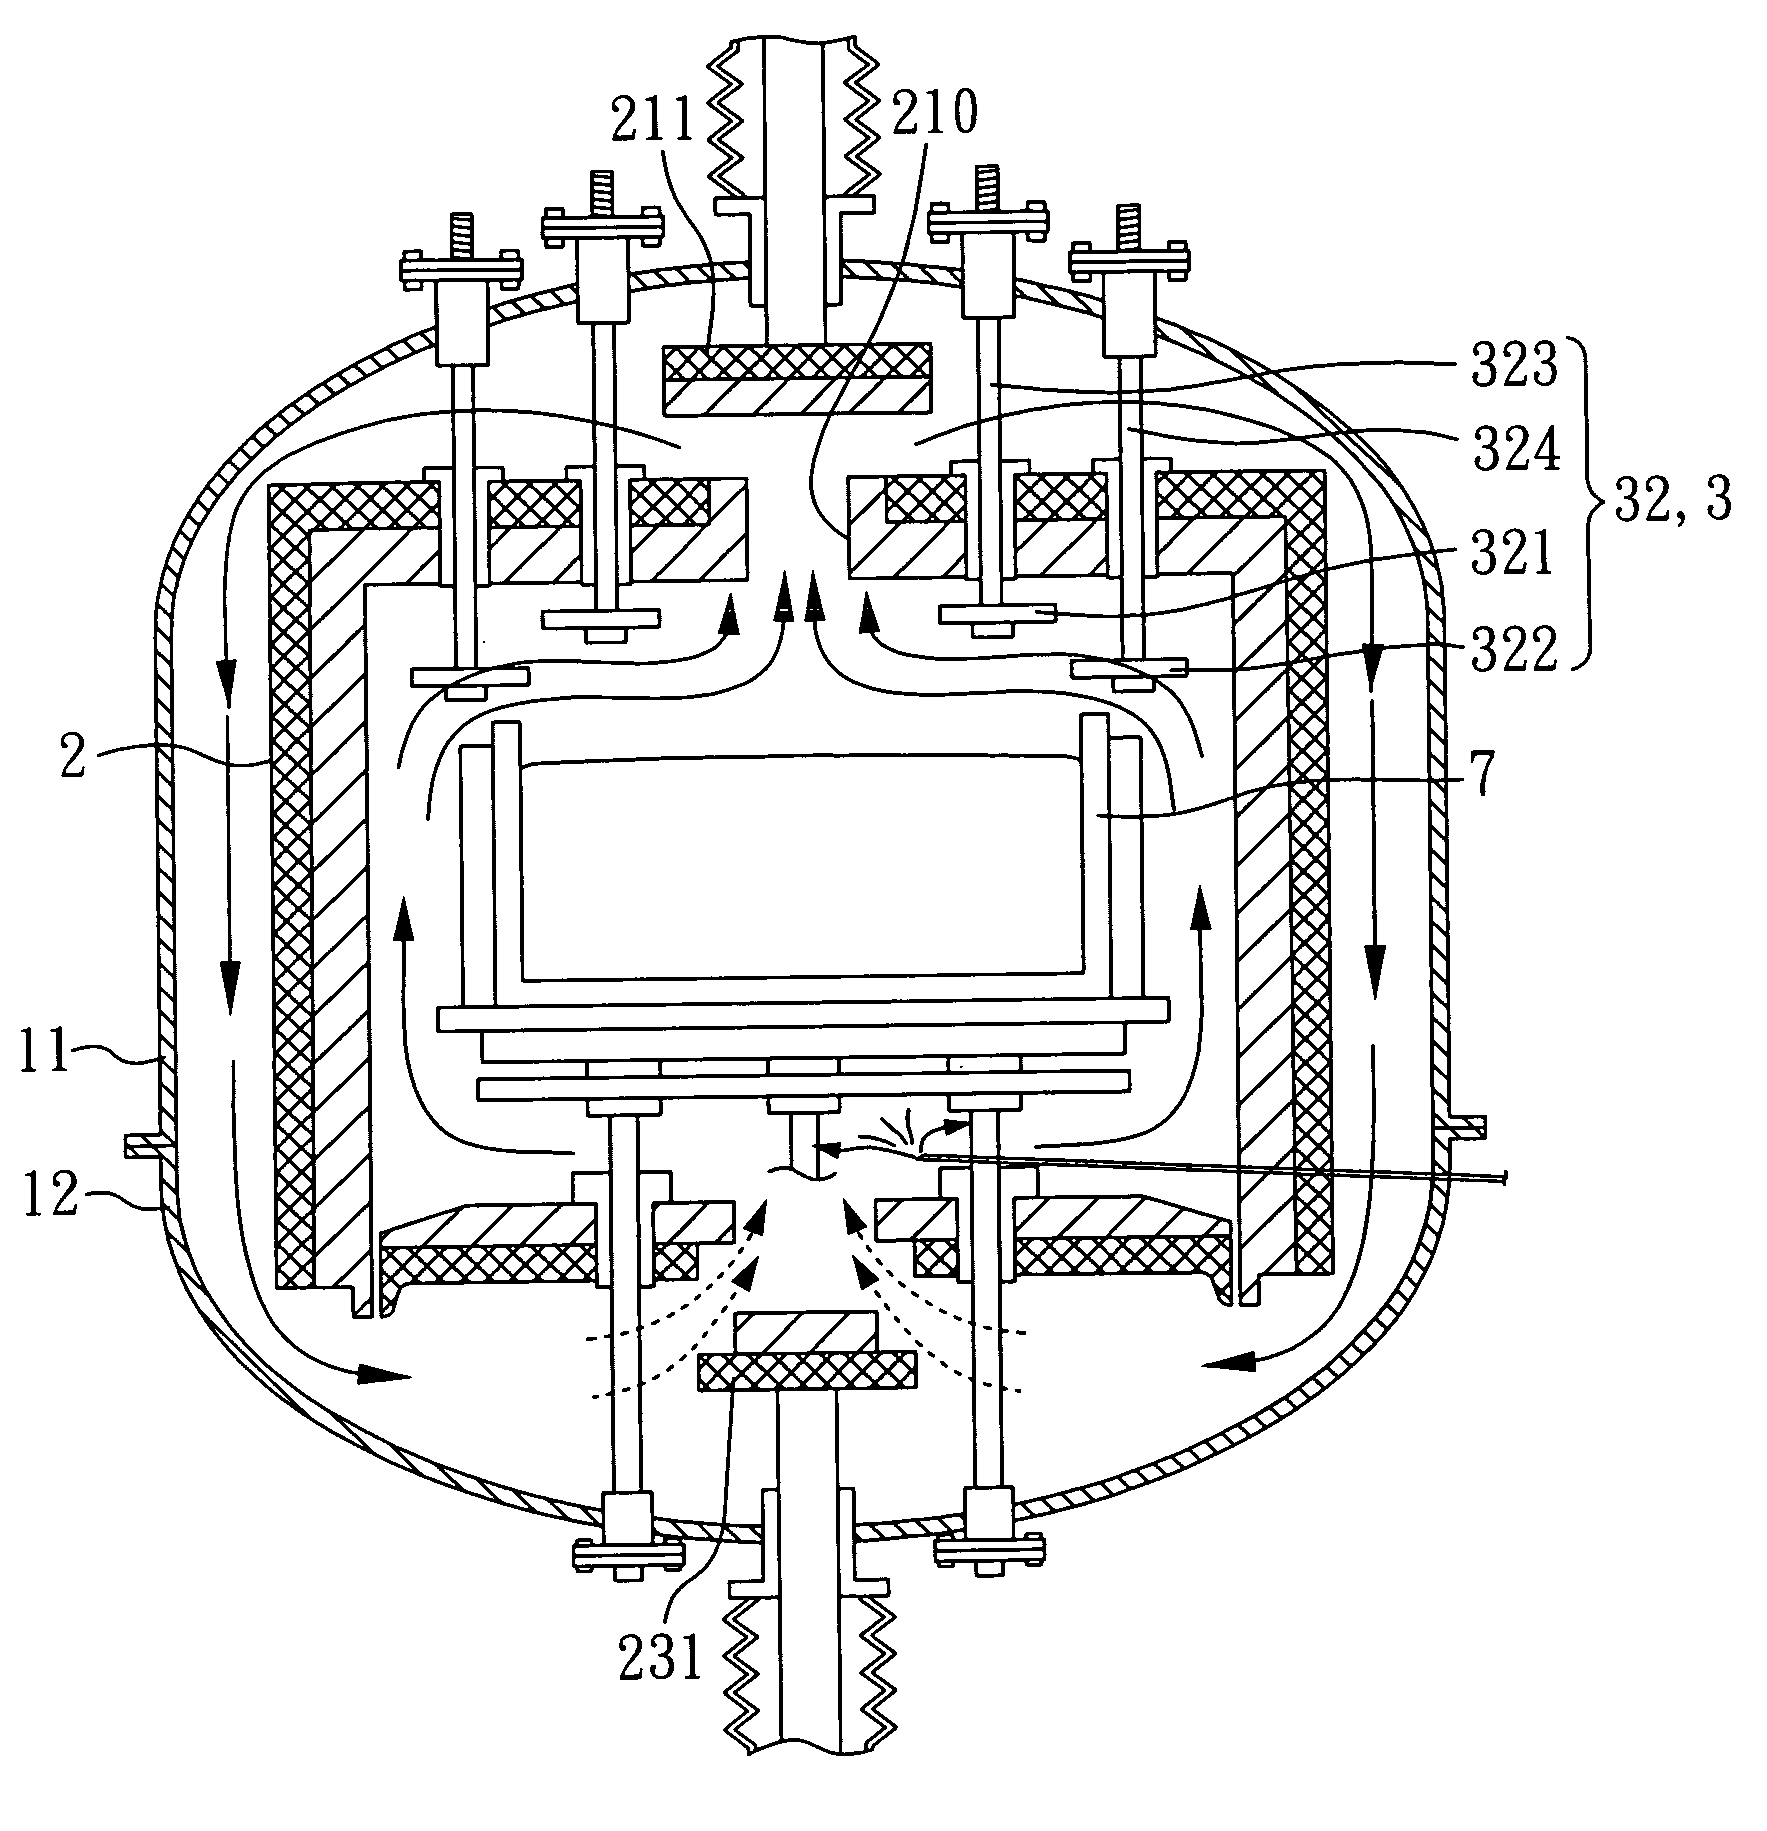 Crystal-growing furnace with convectional cooling structure